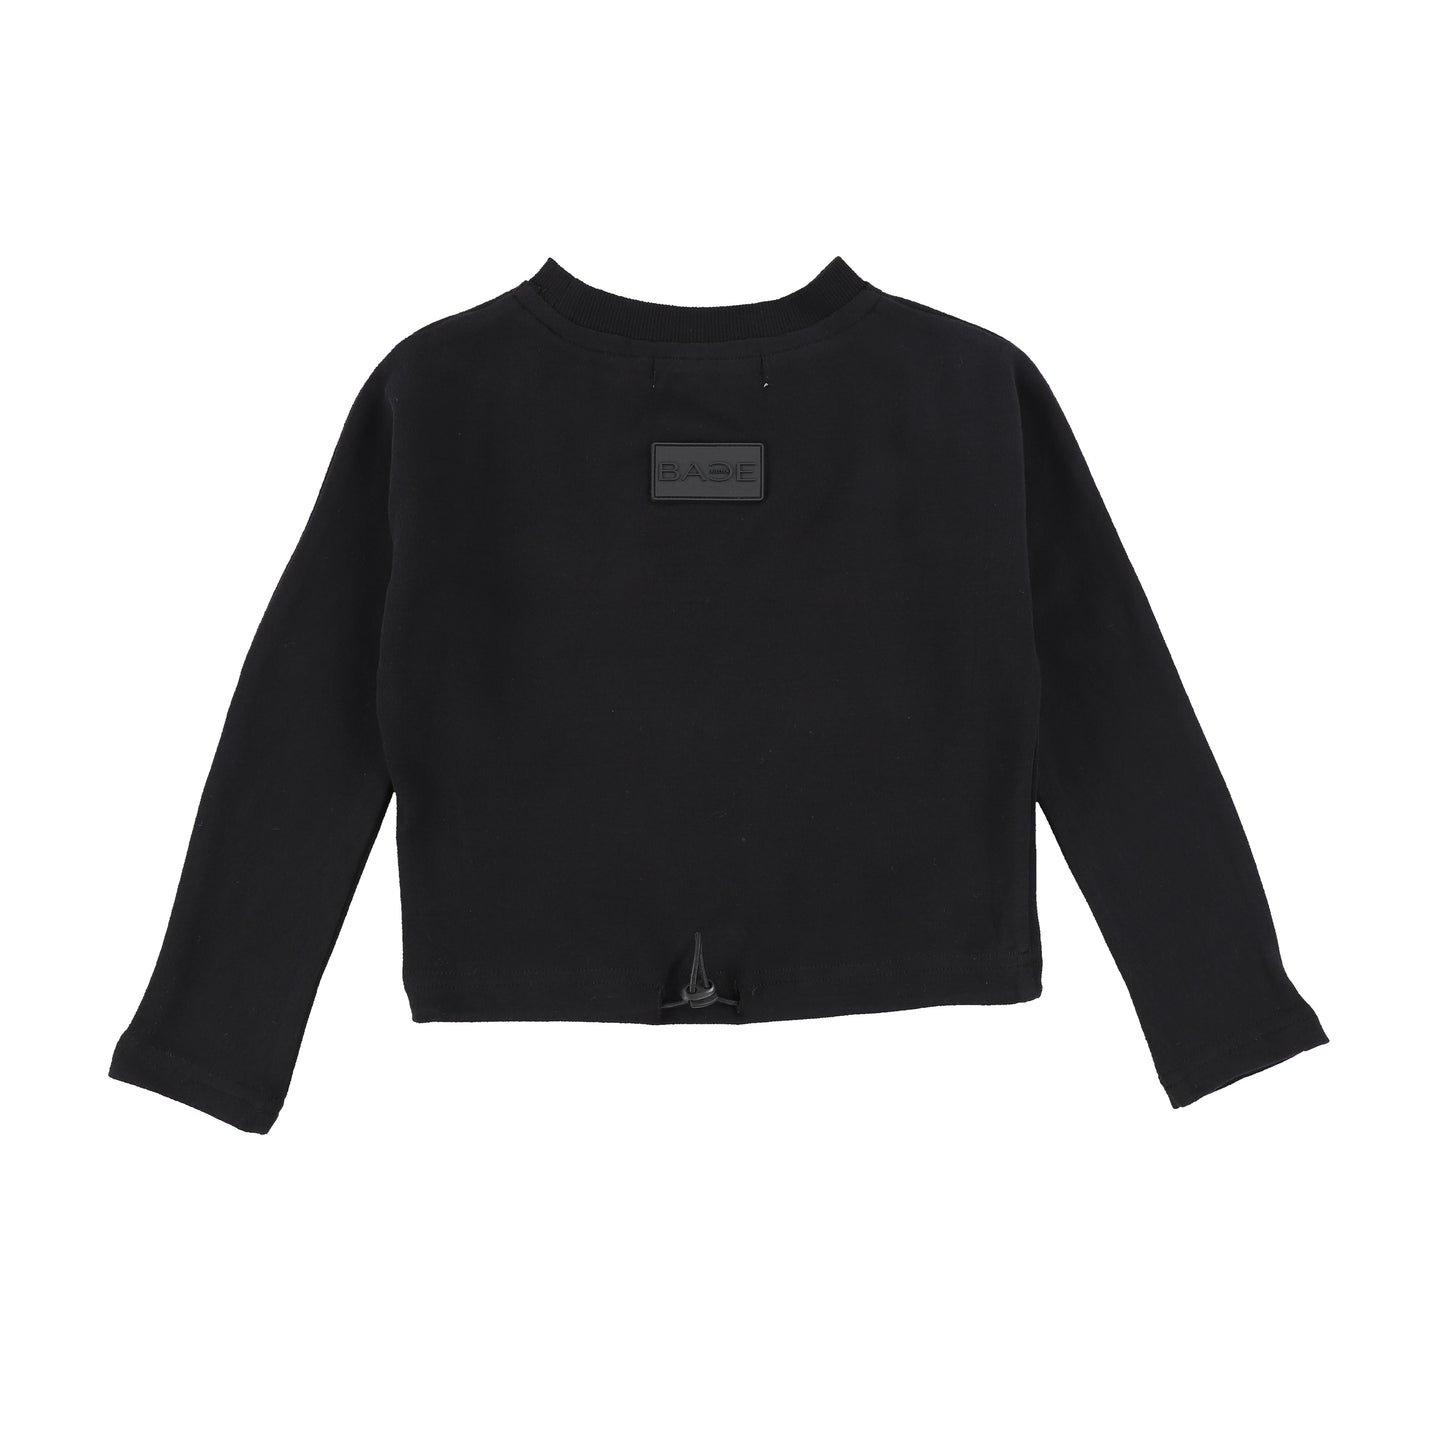 Bace Collection Black Cropped Drawstring Top [Final Sale]